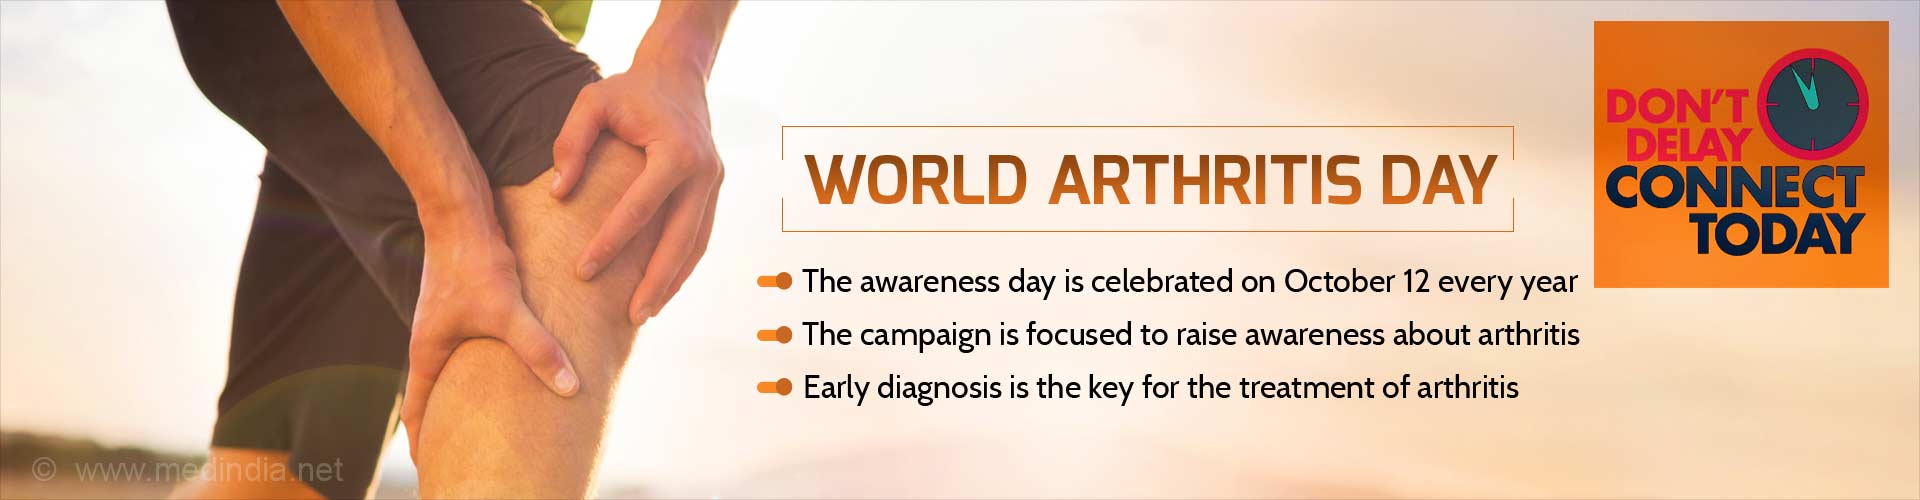 World Arthritis Day
- The awareness day is celebrated on October 12 every year
- The campaign is focused to raise awareness about arthritis
- Early diagnosis is the key for the treatment of arthritis